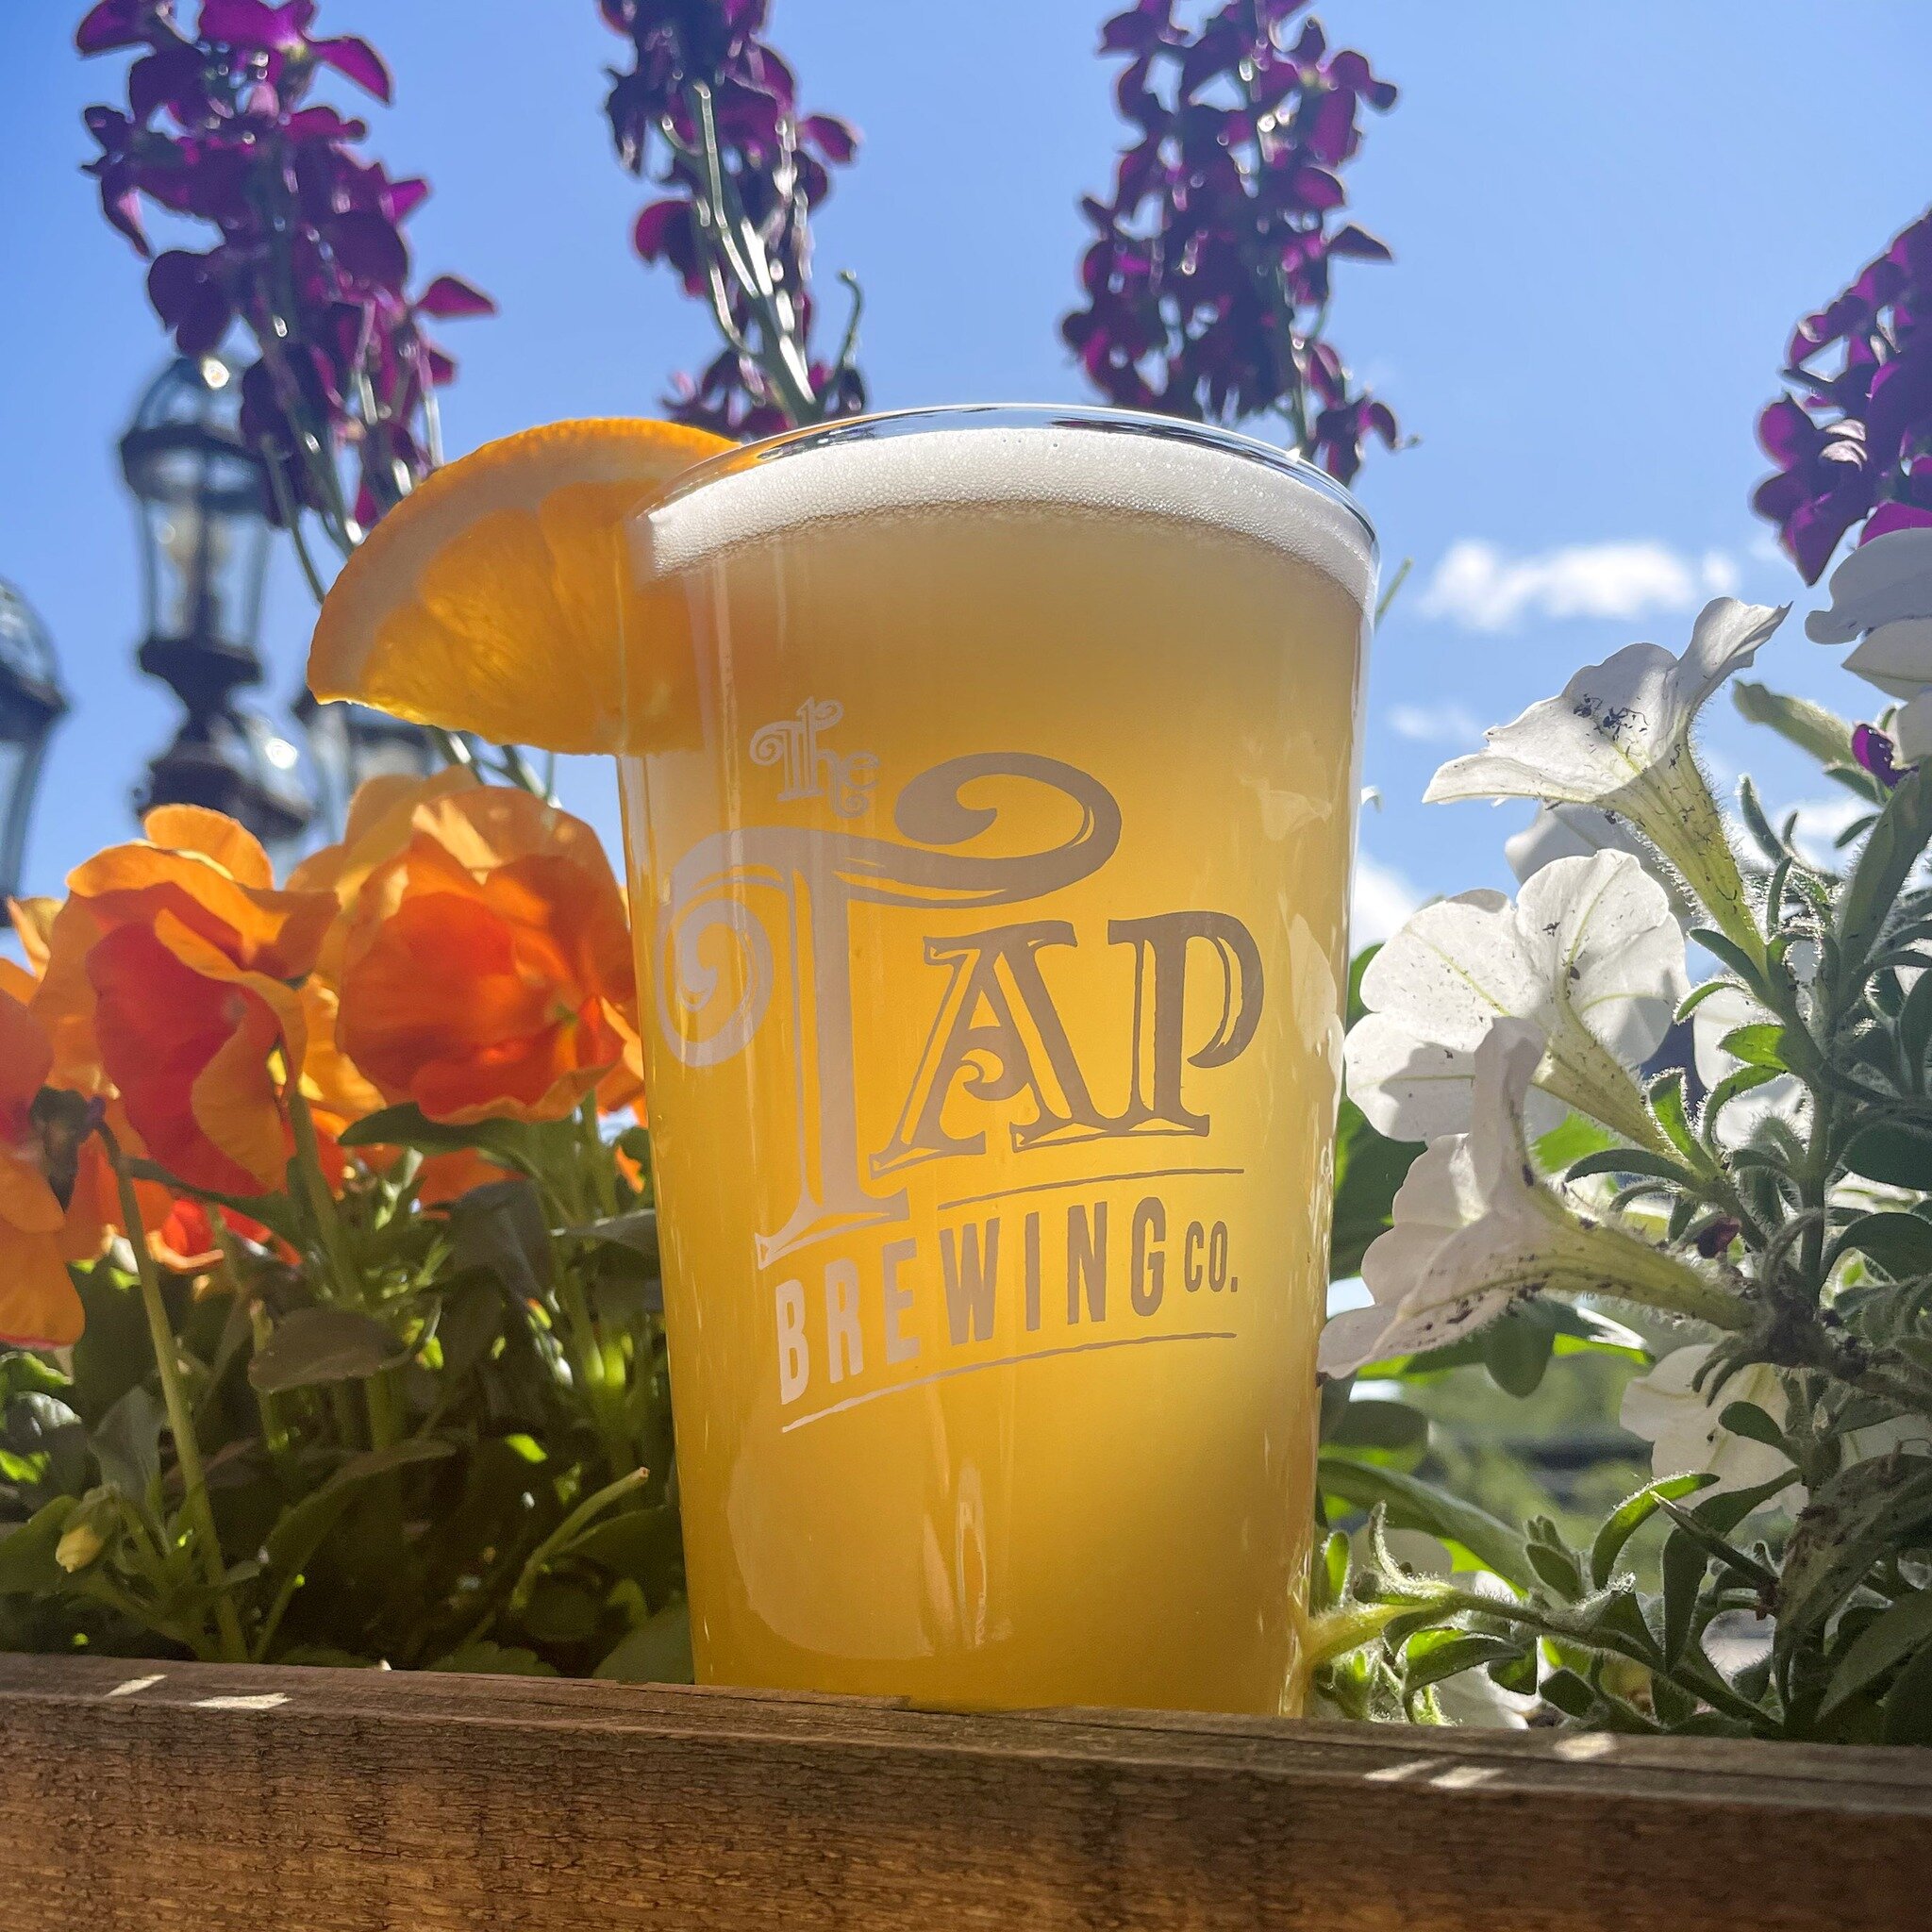 WHITTIER WHITE IS BACK ON TAP! Our classic Belgian wit made with orange peel, coriander and grains of paradise. Fermented with Belgian yeast which brings out the citrus fruitiness. Refreshing Tap patrons since 2003!
#itsback! #ondraftnow #whittierwhi